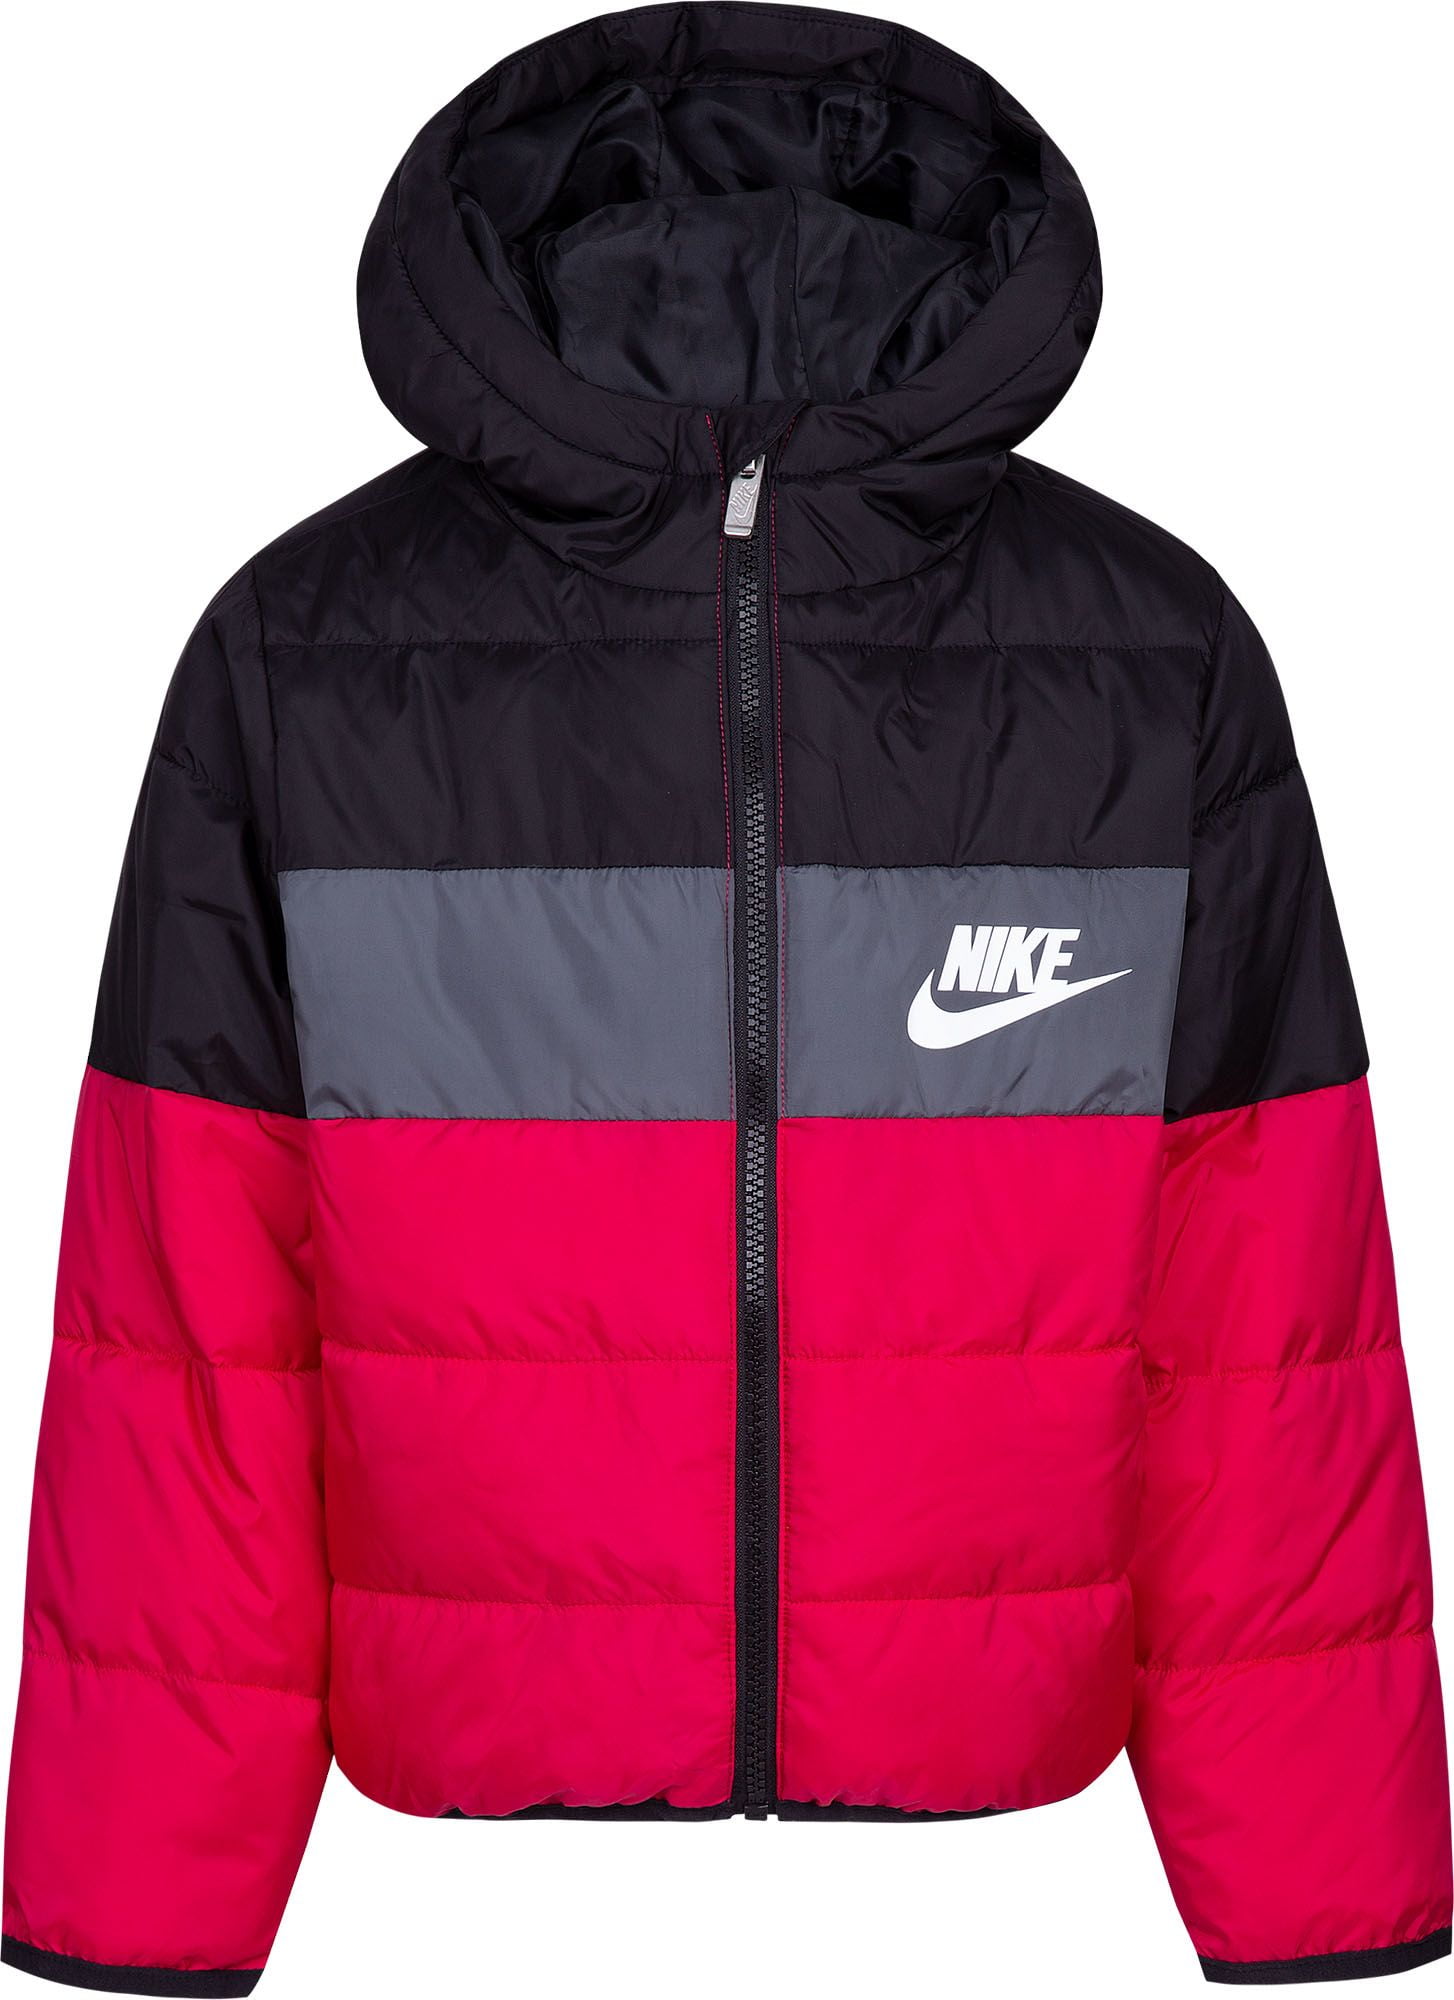 pink nike jacket with hearts